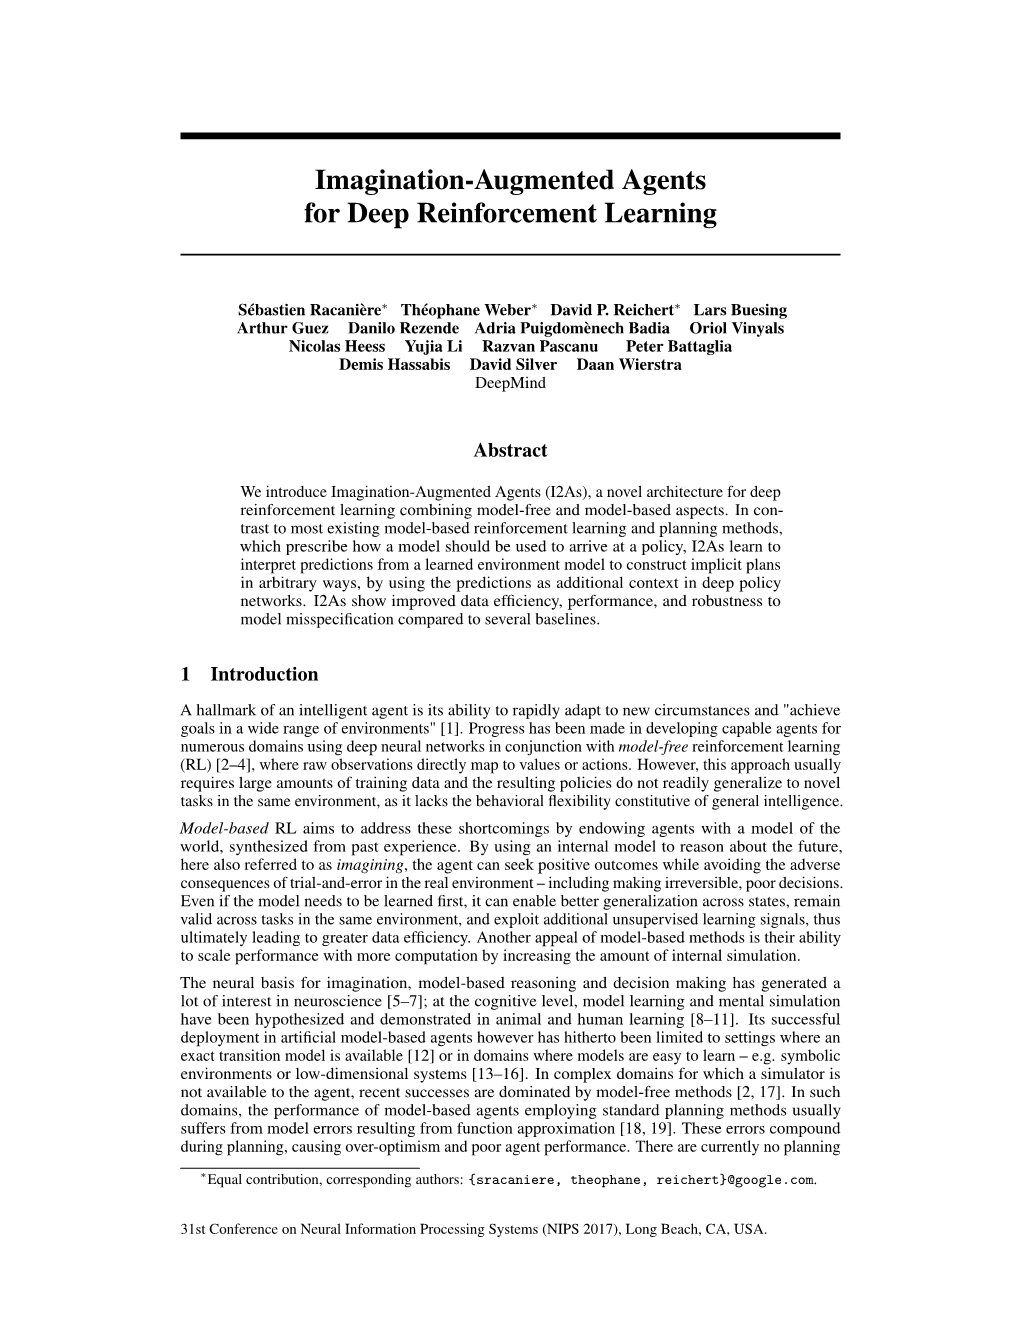 Imagination-Augmented Agents for Deep Reinforcement Learning